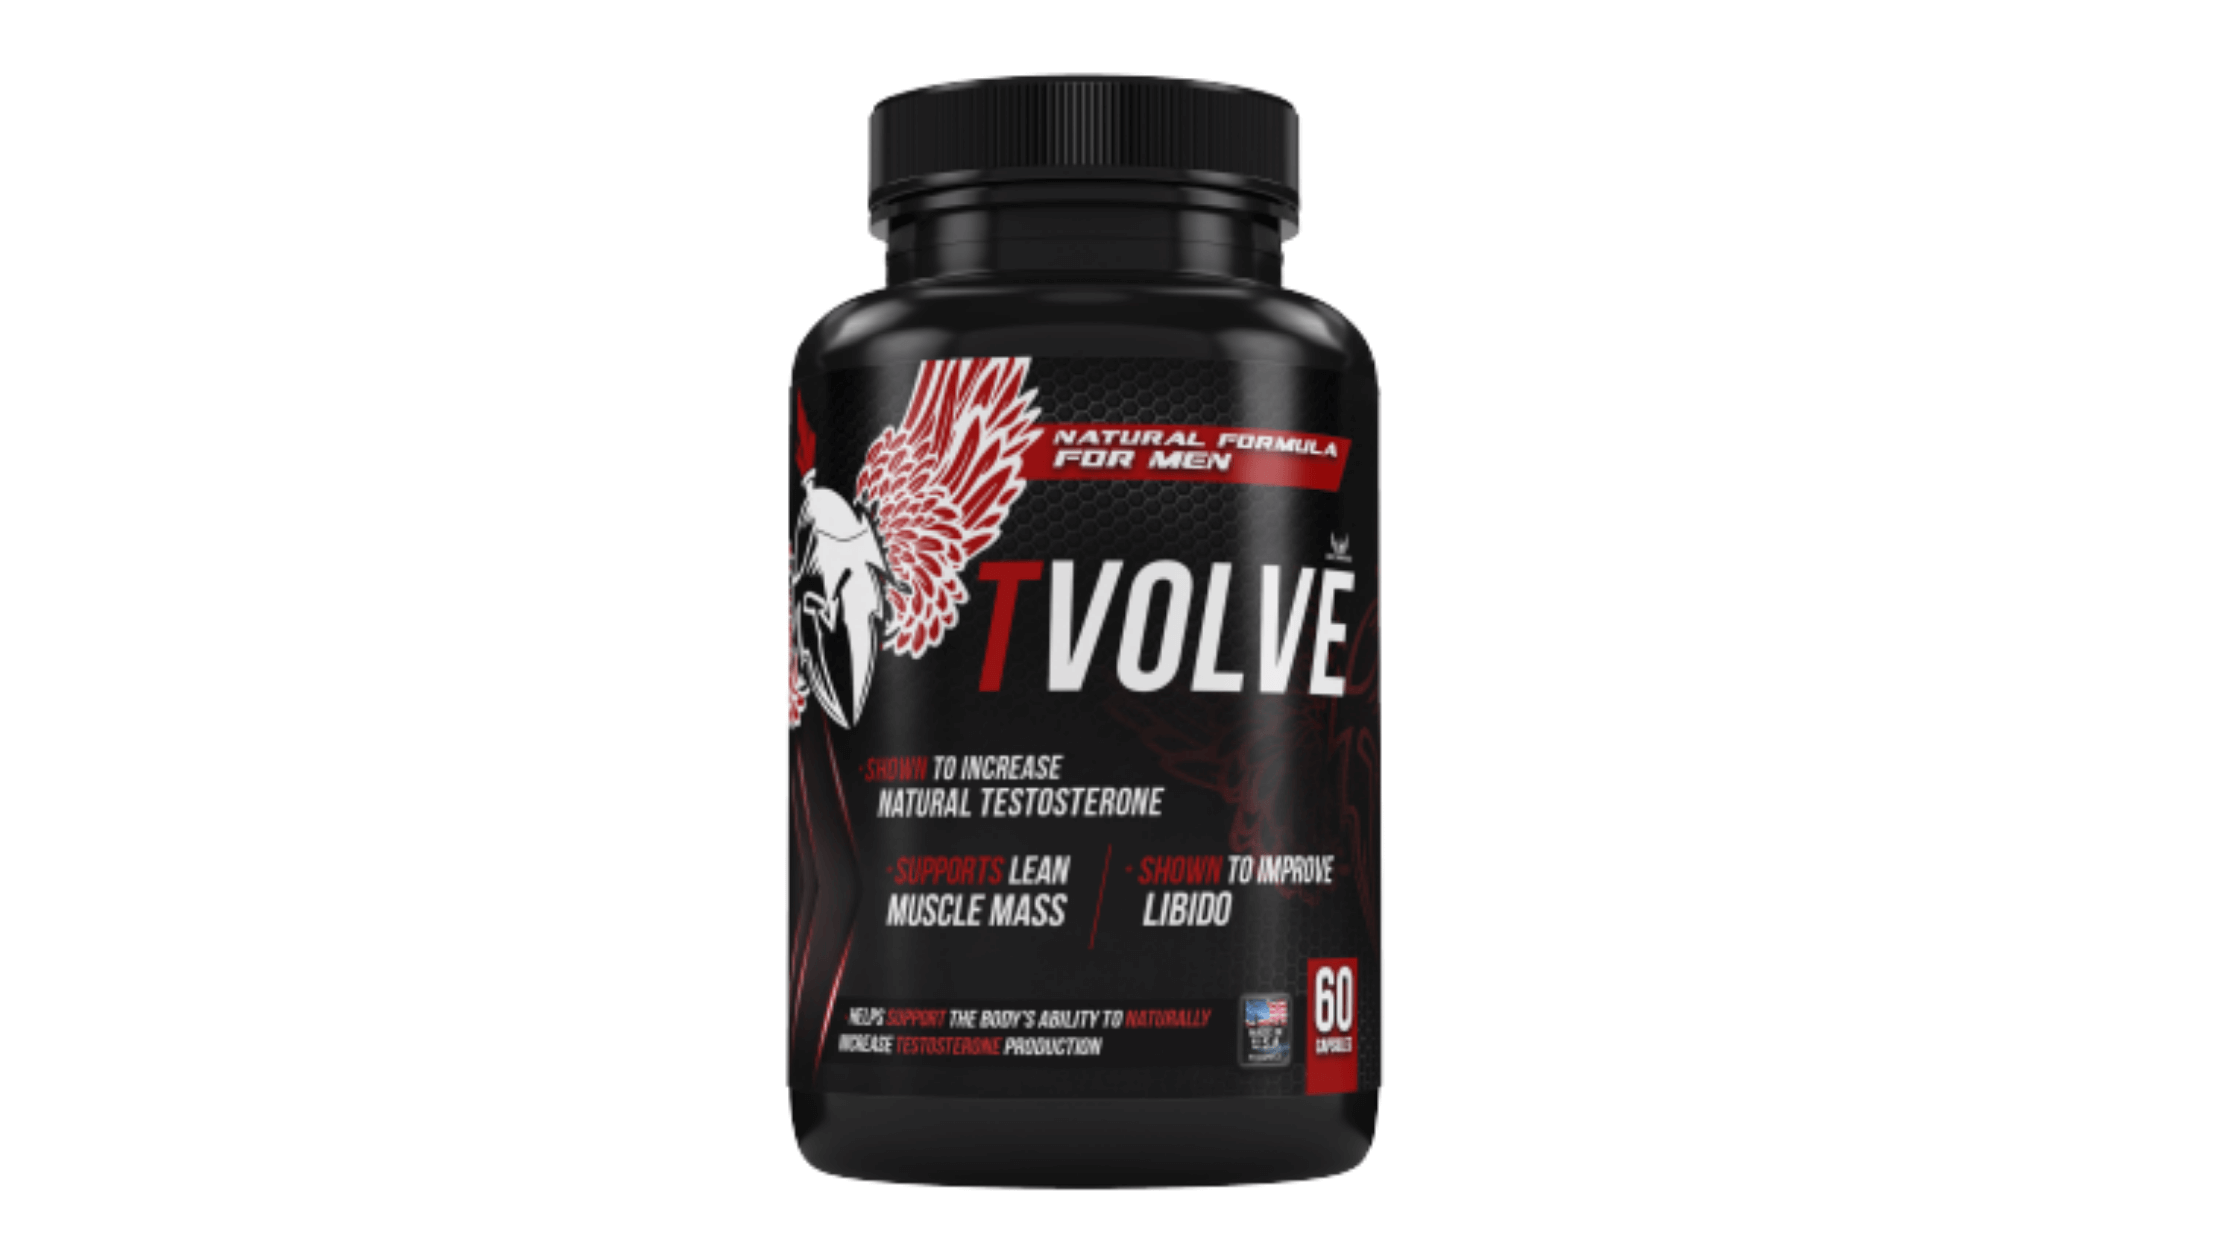 TVolve GT5 Muscle Complex Reviews: Is This Supplement Safe To Use?